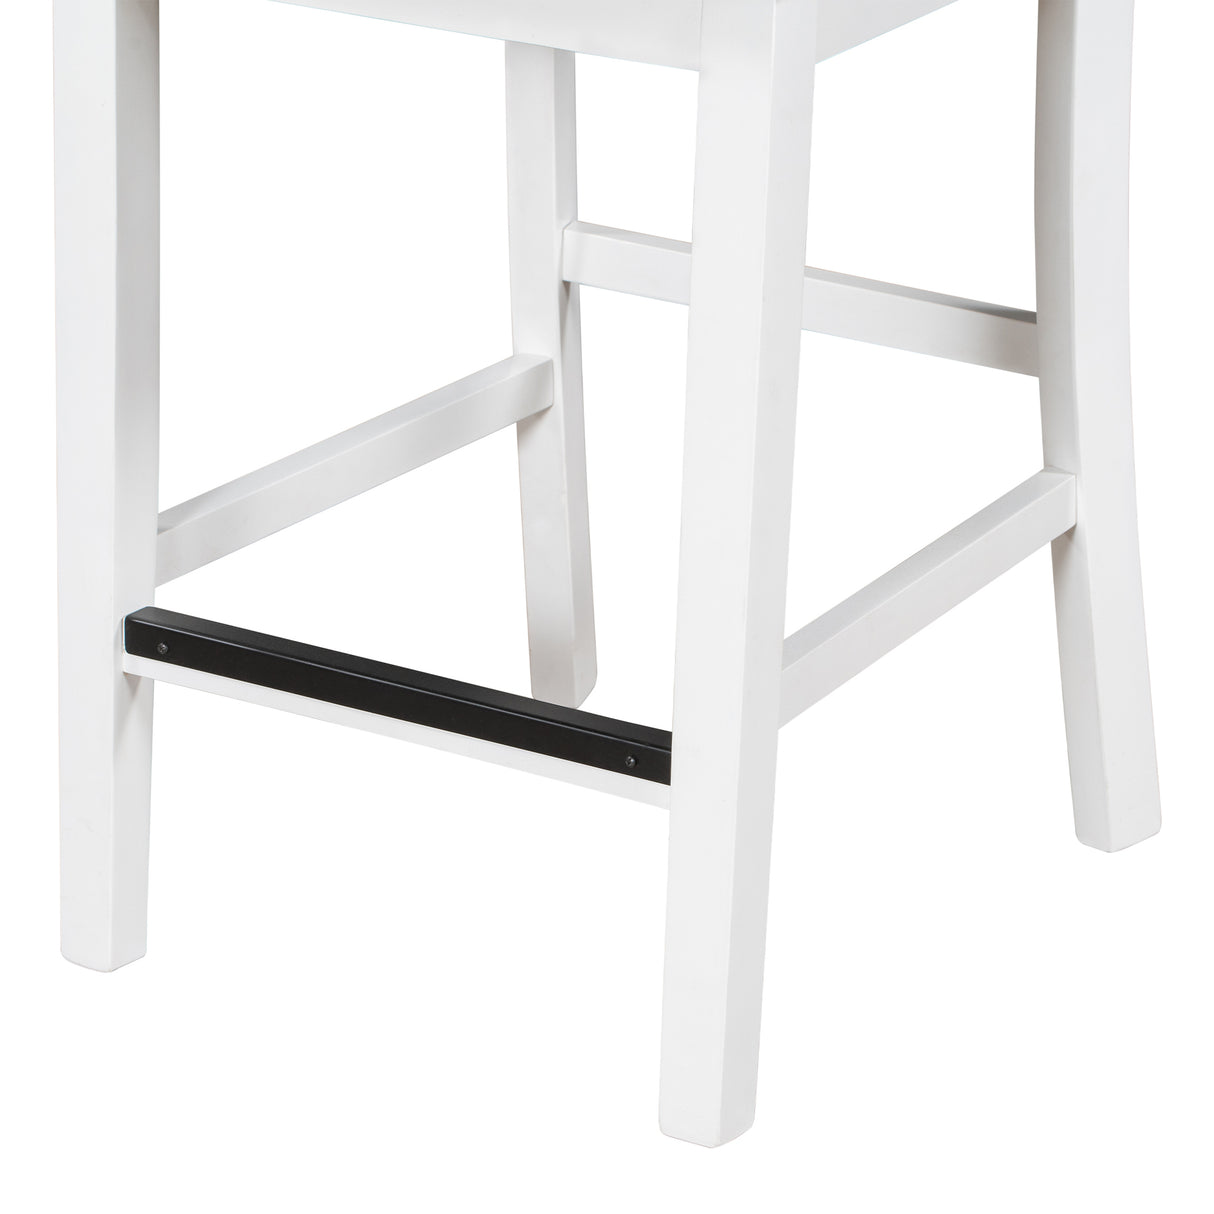 TOPMAX Casual Counter Height Wood Upholstered Dining Chairs with Cross Backs, Set of 4, White+Beige - Home Elegance USA